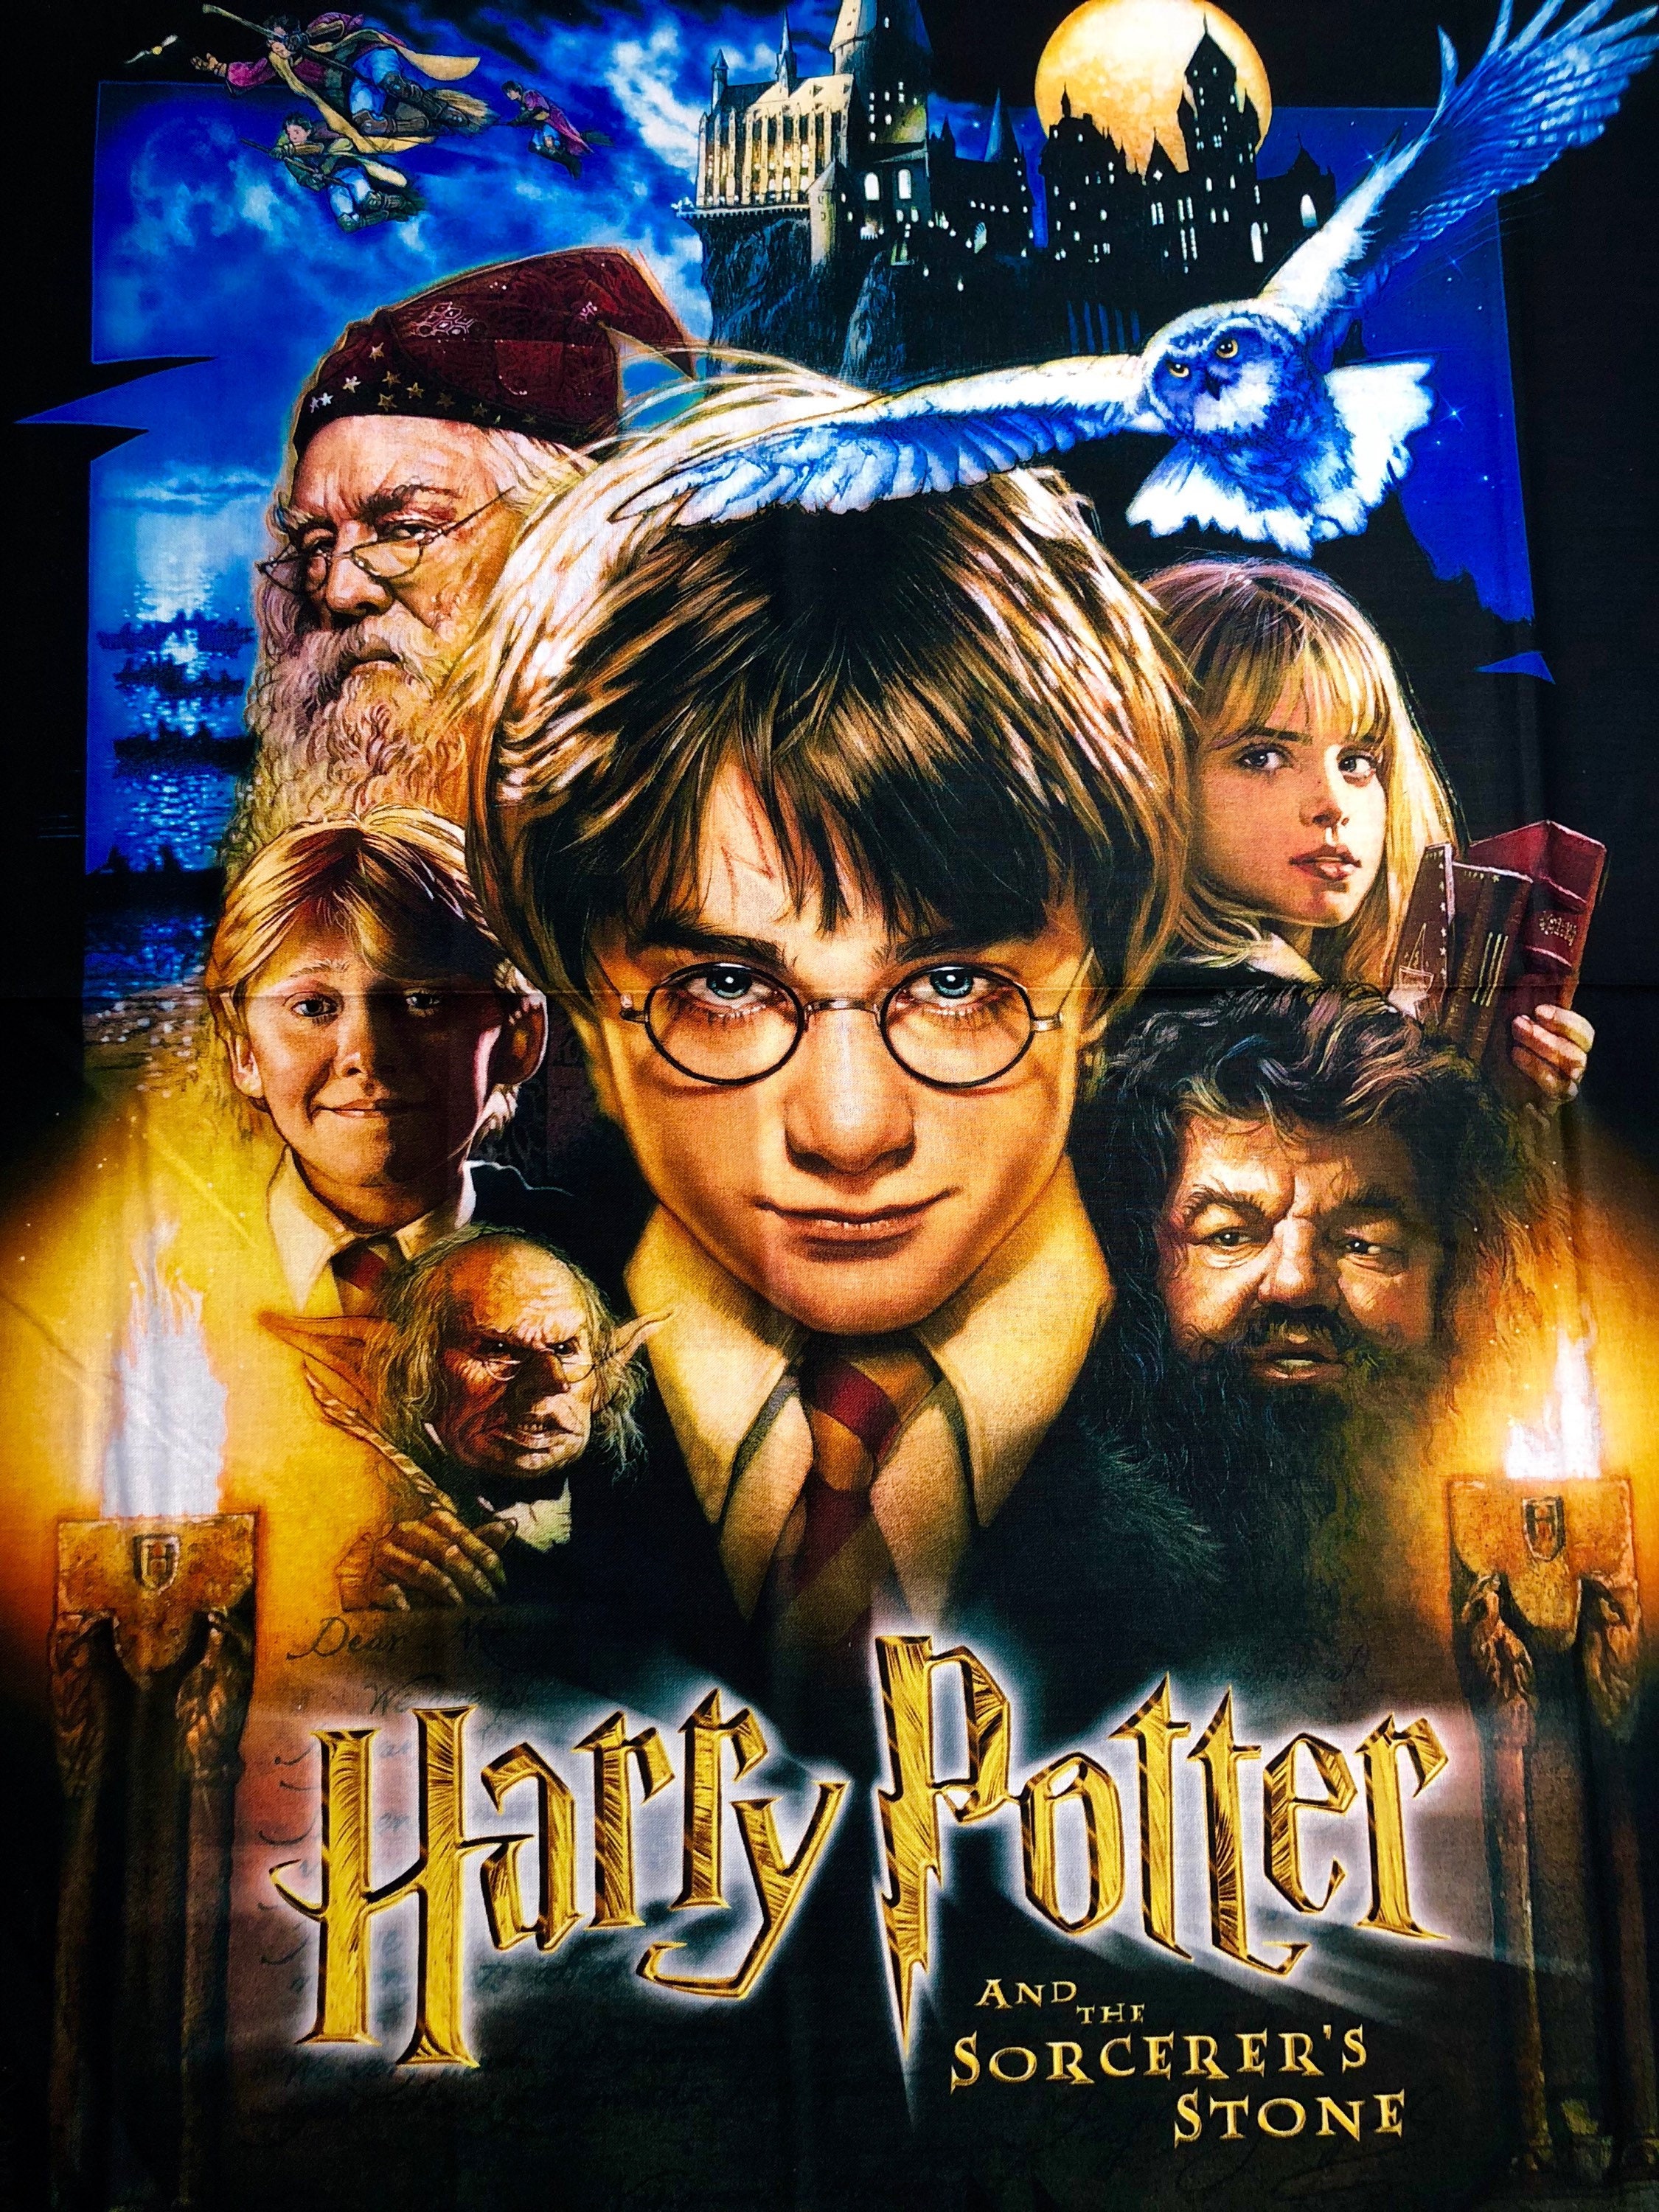 [FlixFling] Harry Potter and the Sorcerer's Stone Watch - Pedro Barnes - Harry Potter And The Sorcerer's Stone